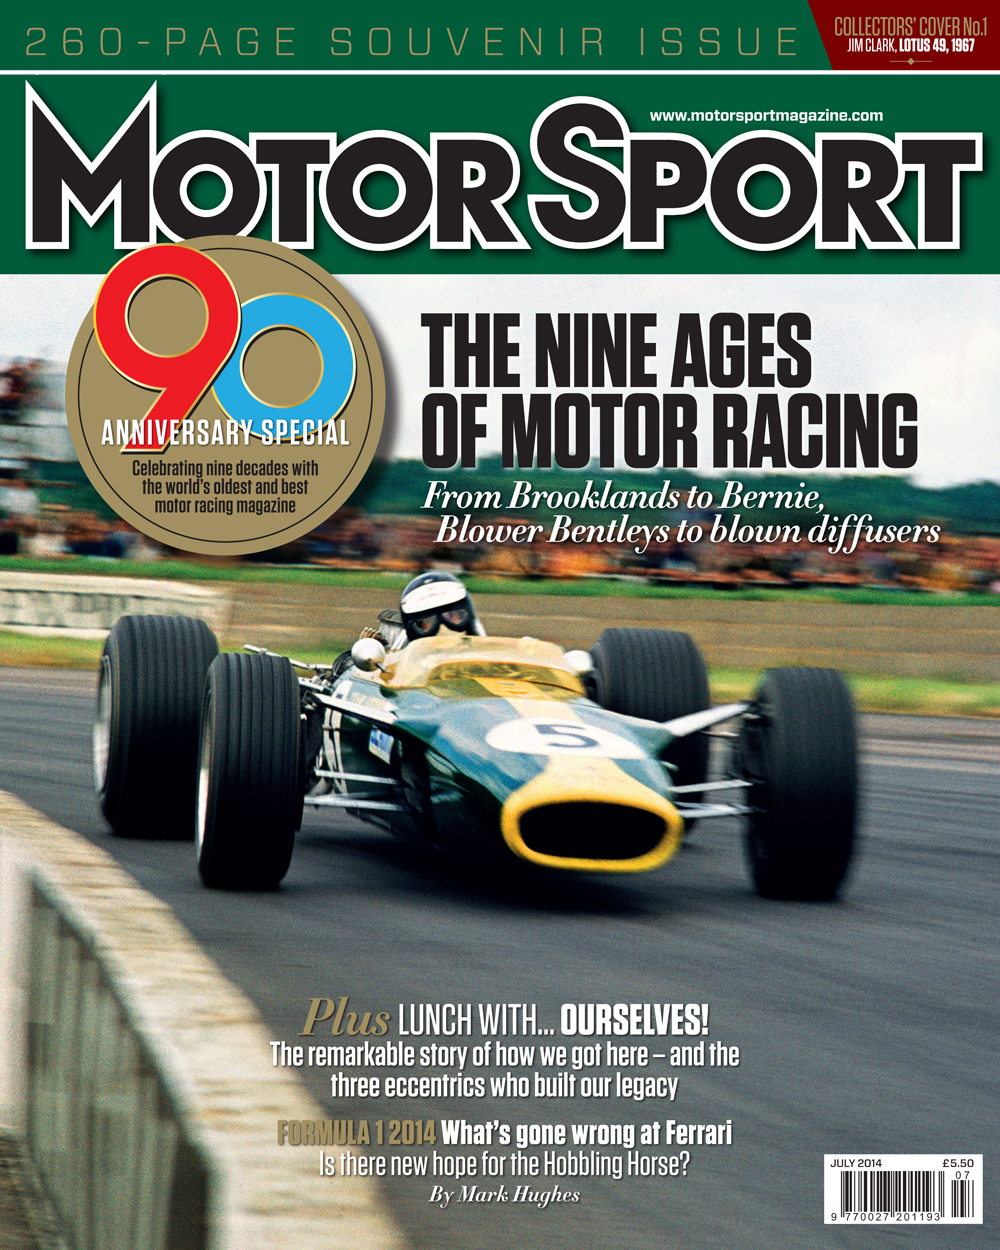 Motor Sport Magazine and VSCC join to celebrate respective 90th and 80th Anniversaries with Special Subscription Offer Members cover